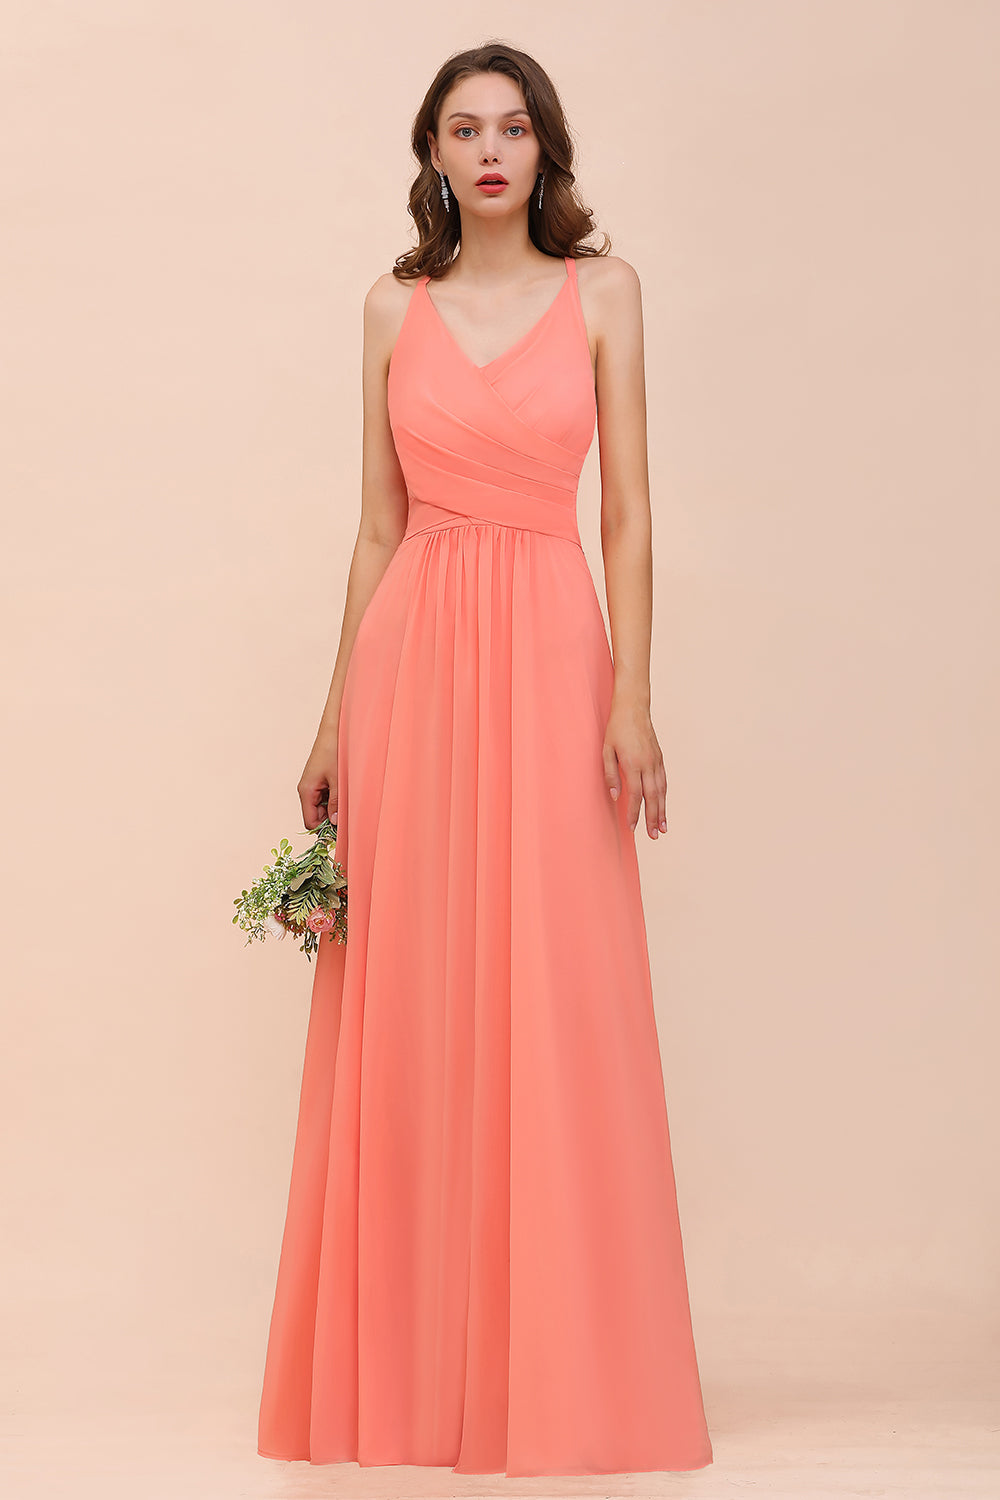 Load image into Gallery viewer, Coral Long A-line Chiffon V-neck Bridesmaid Dress with Ruffle-BIZTUNNEL
